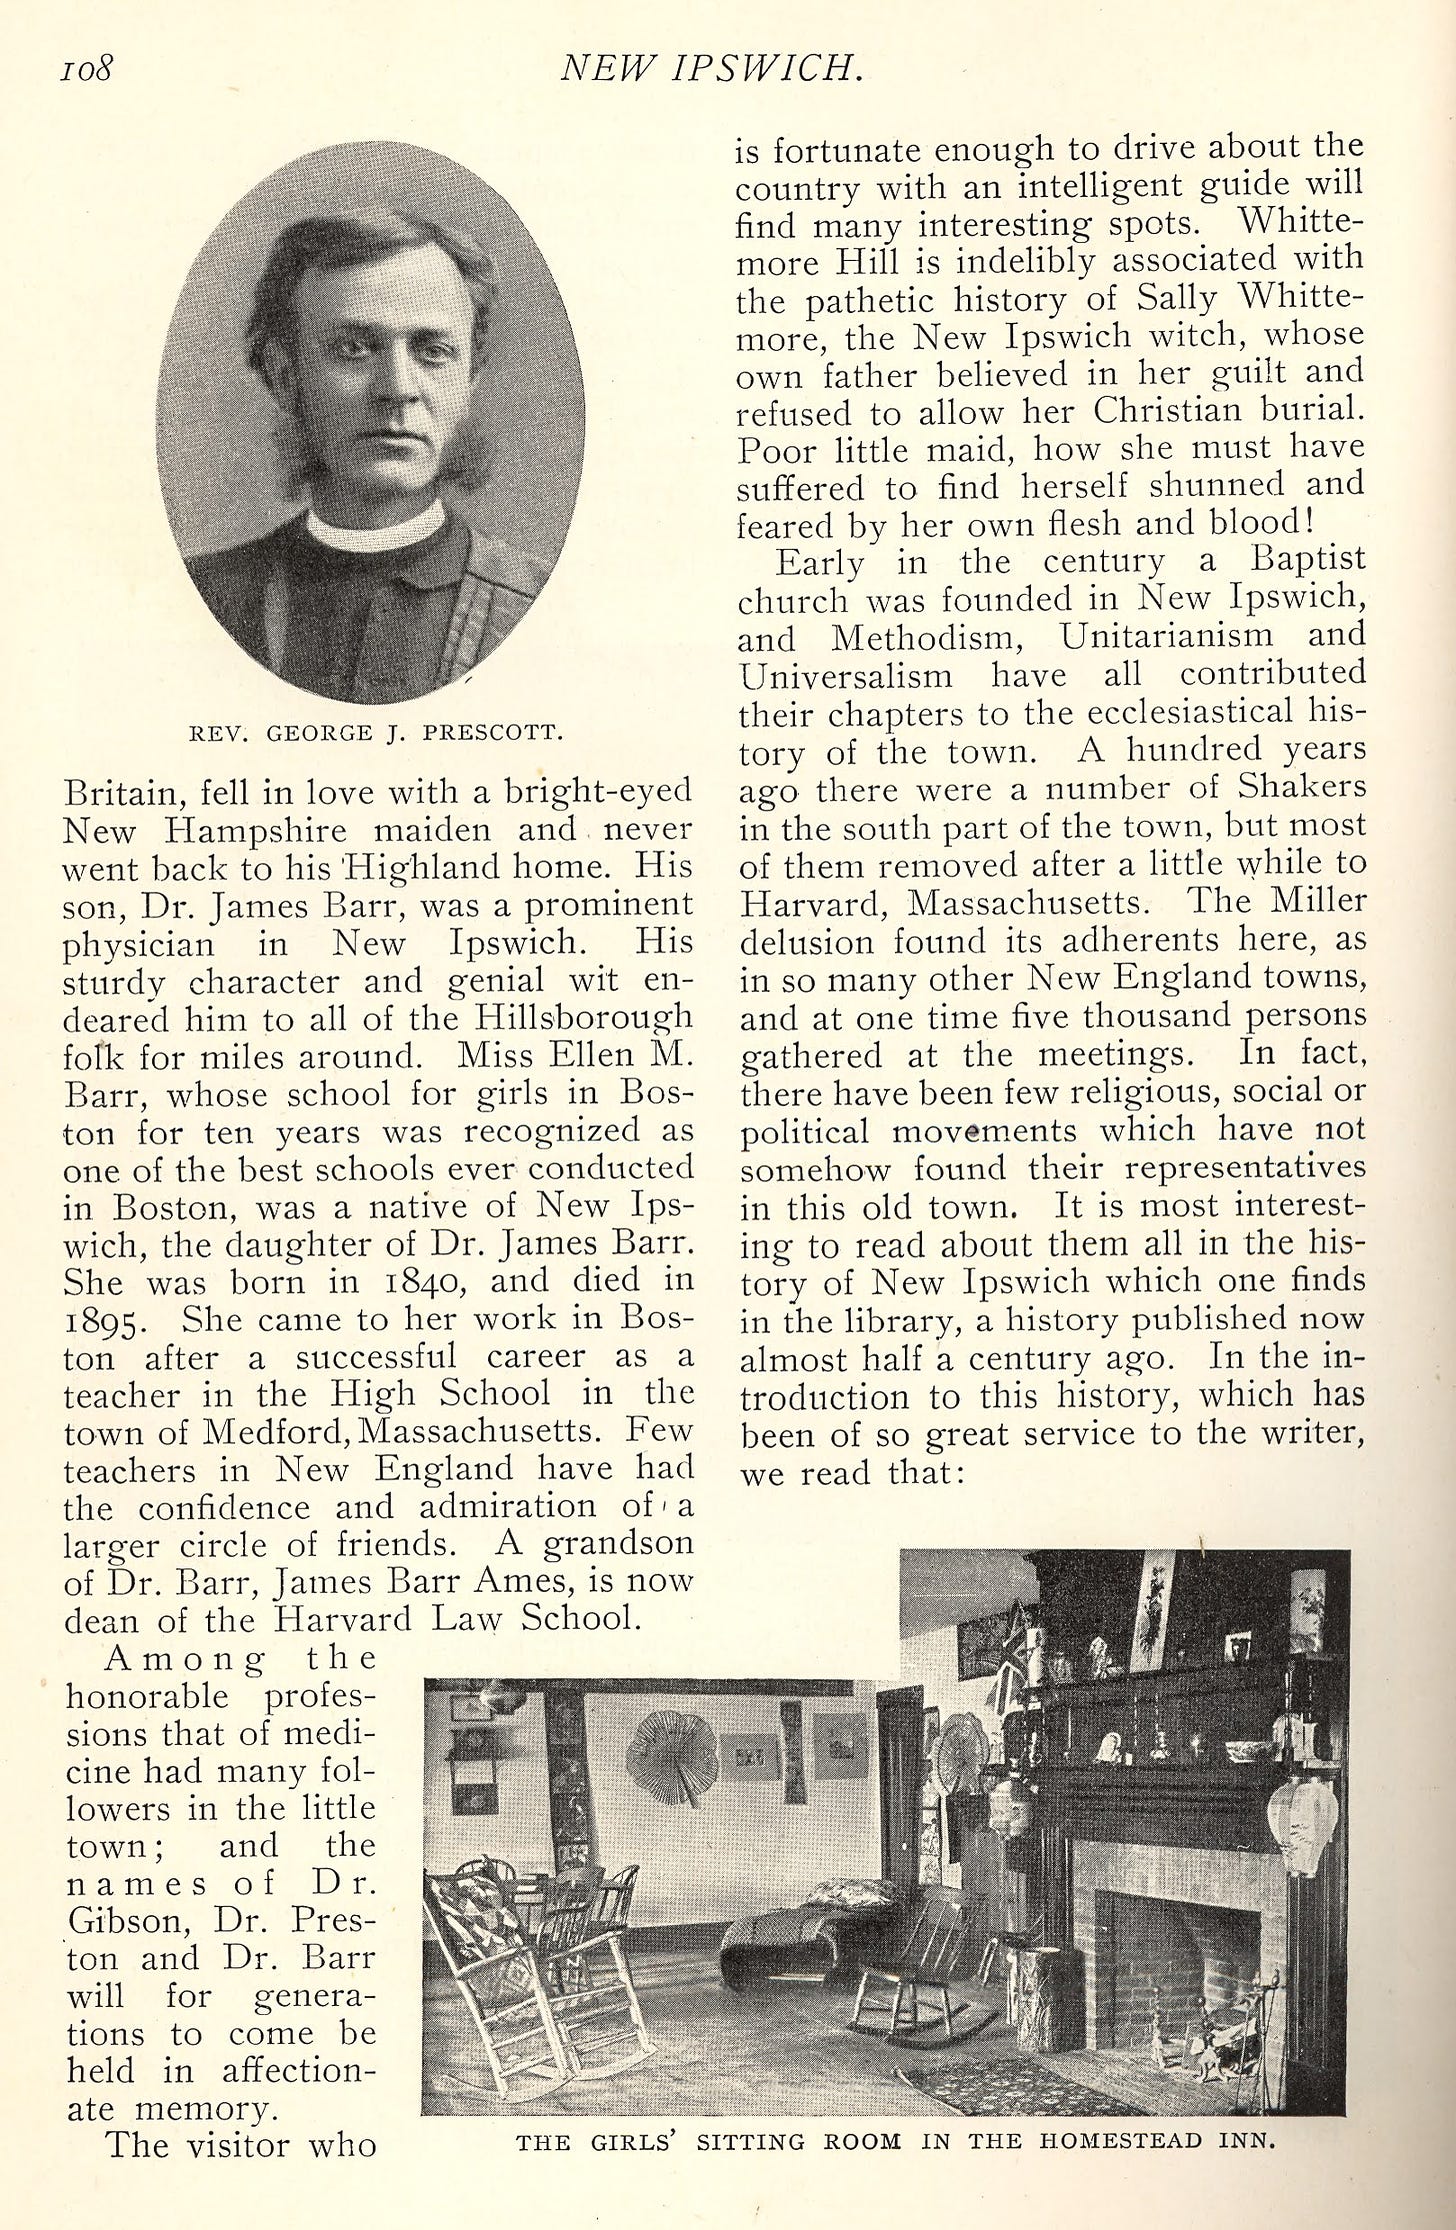 New England Magazine, March 1900, page 108